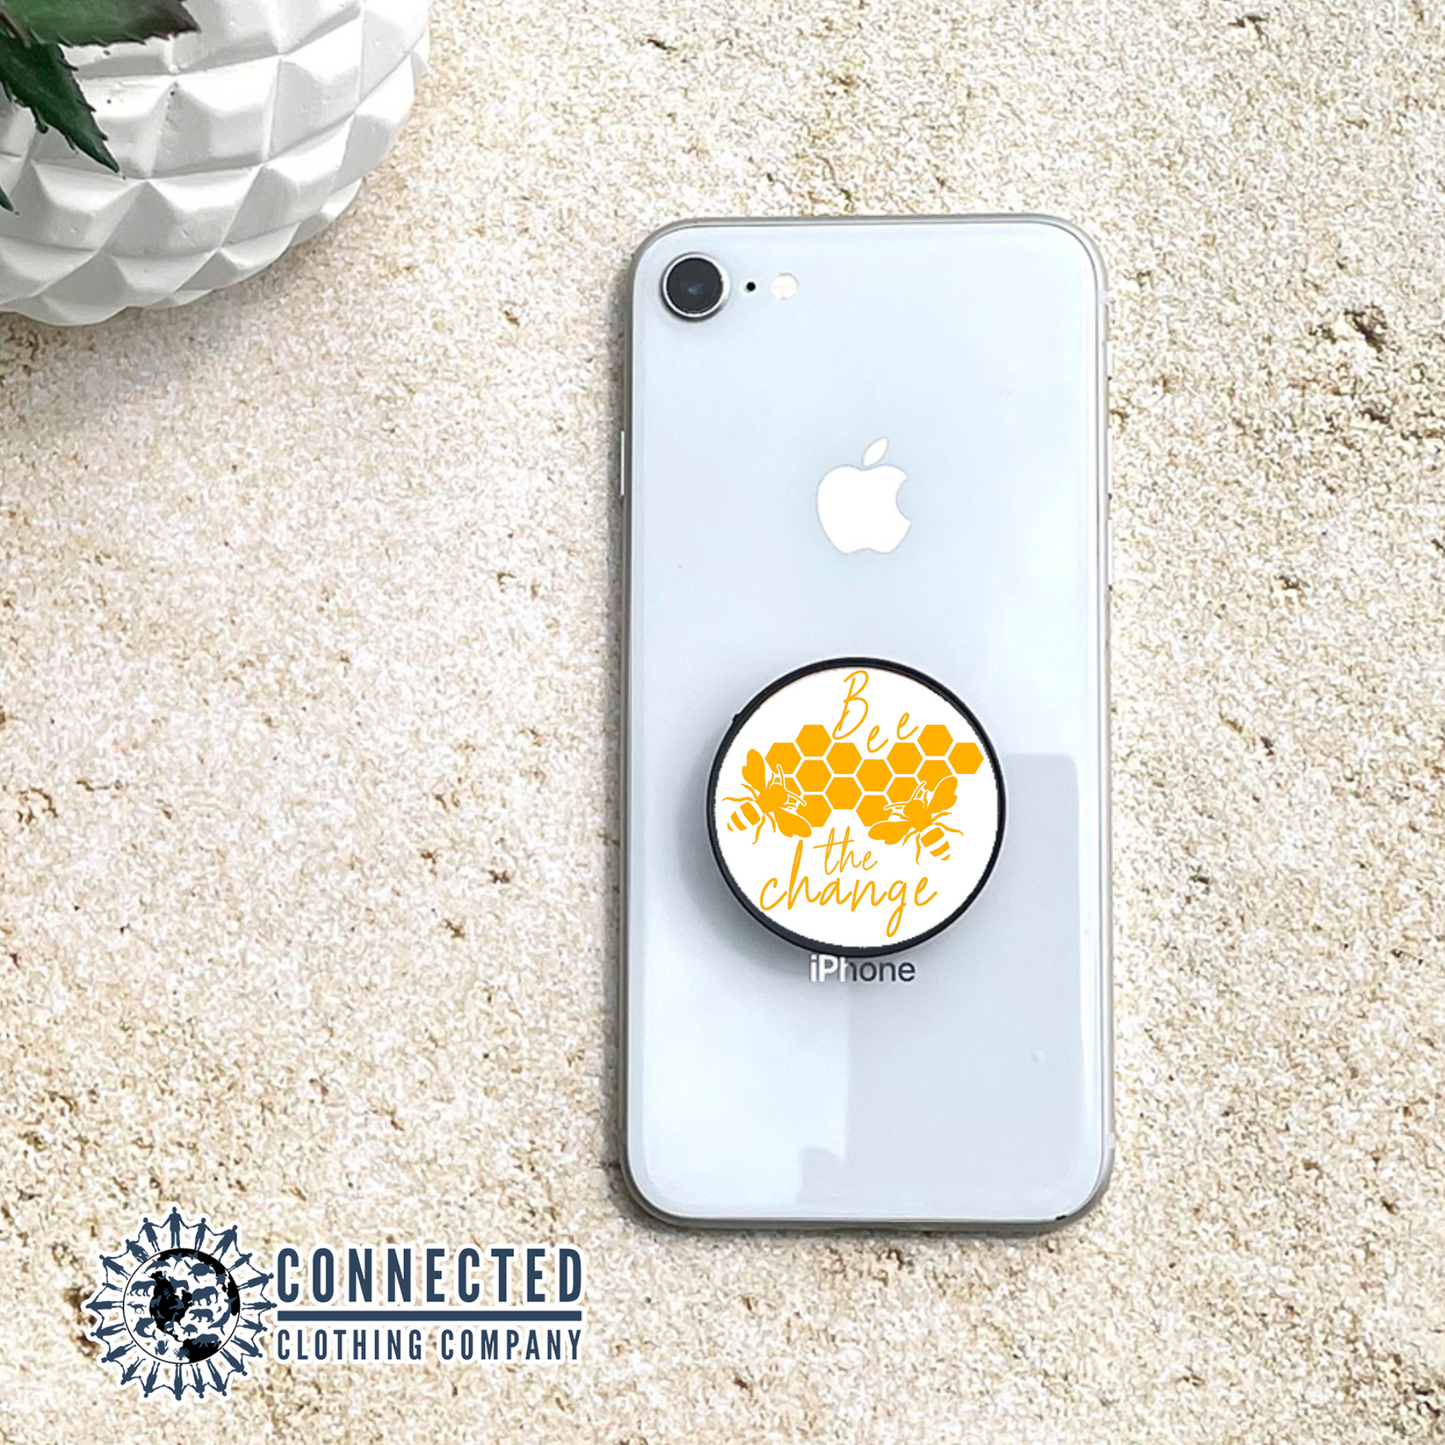 Bee The Change Phone Grip - sharonkornman - 10% of proceeds donated to save the bees